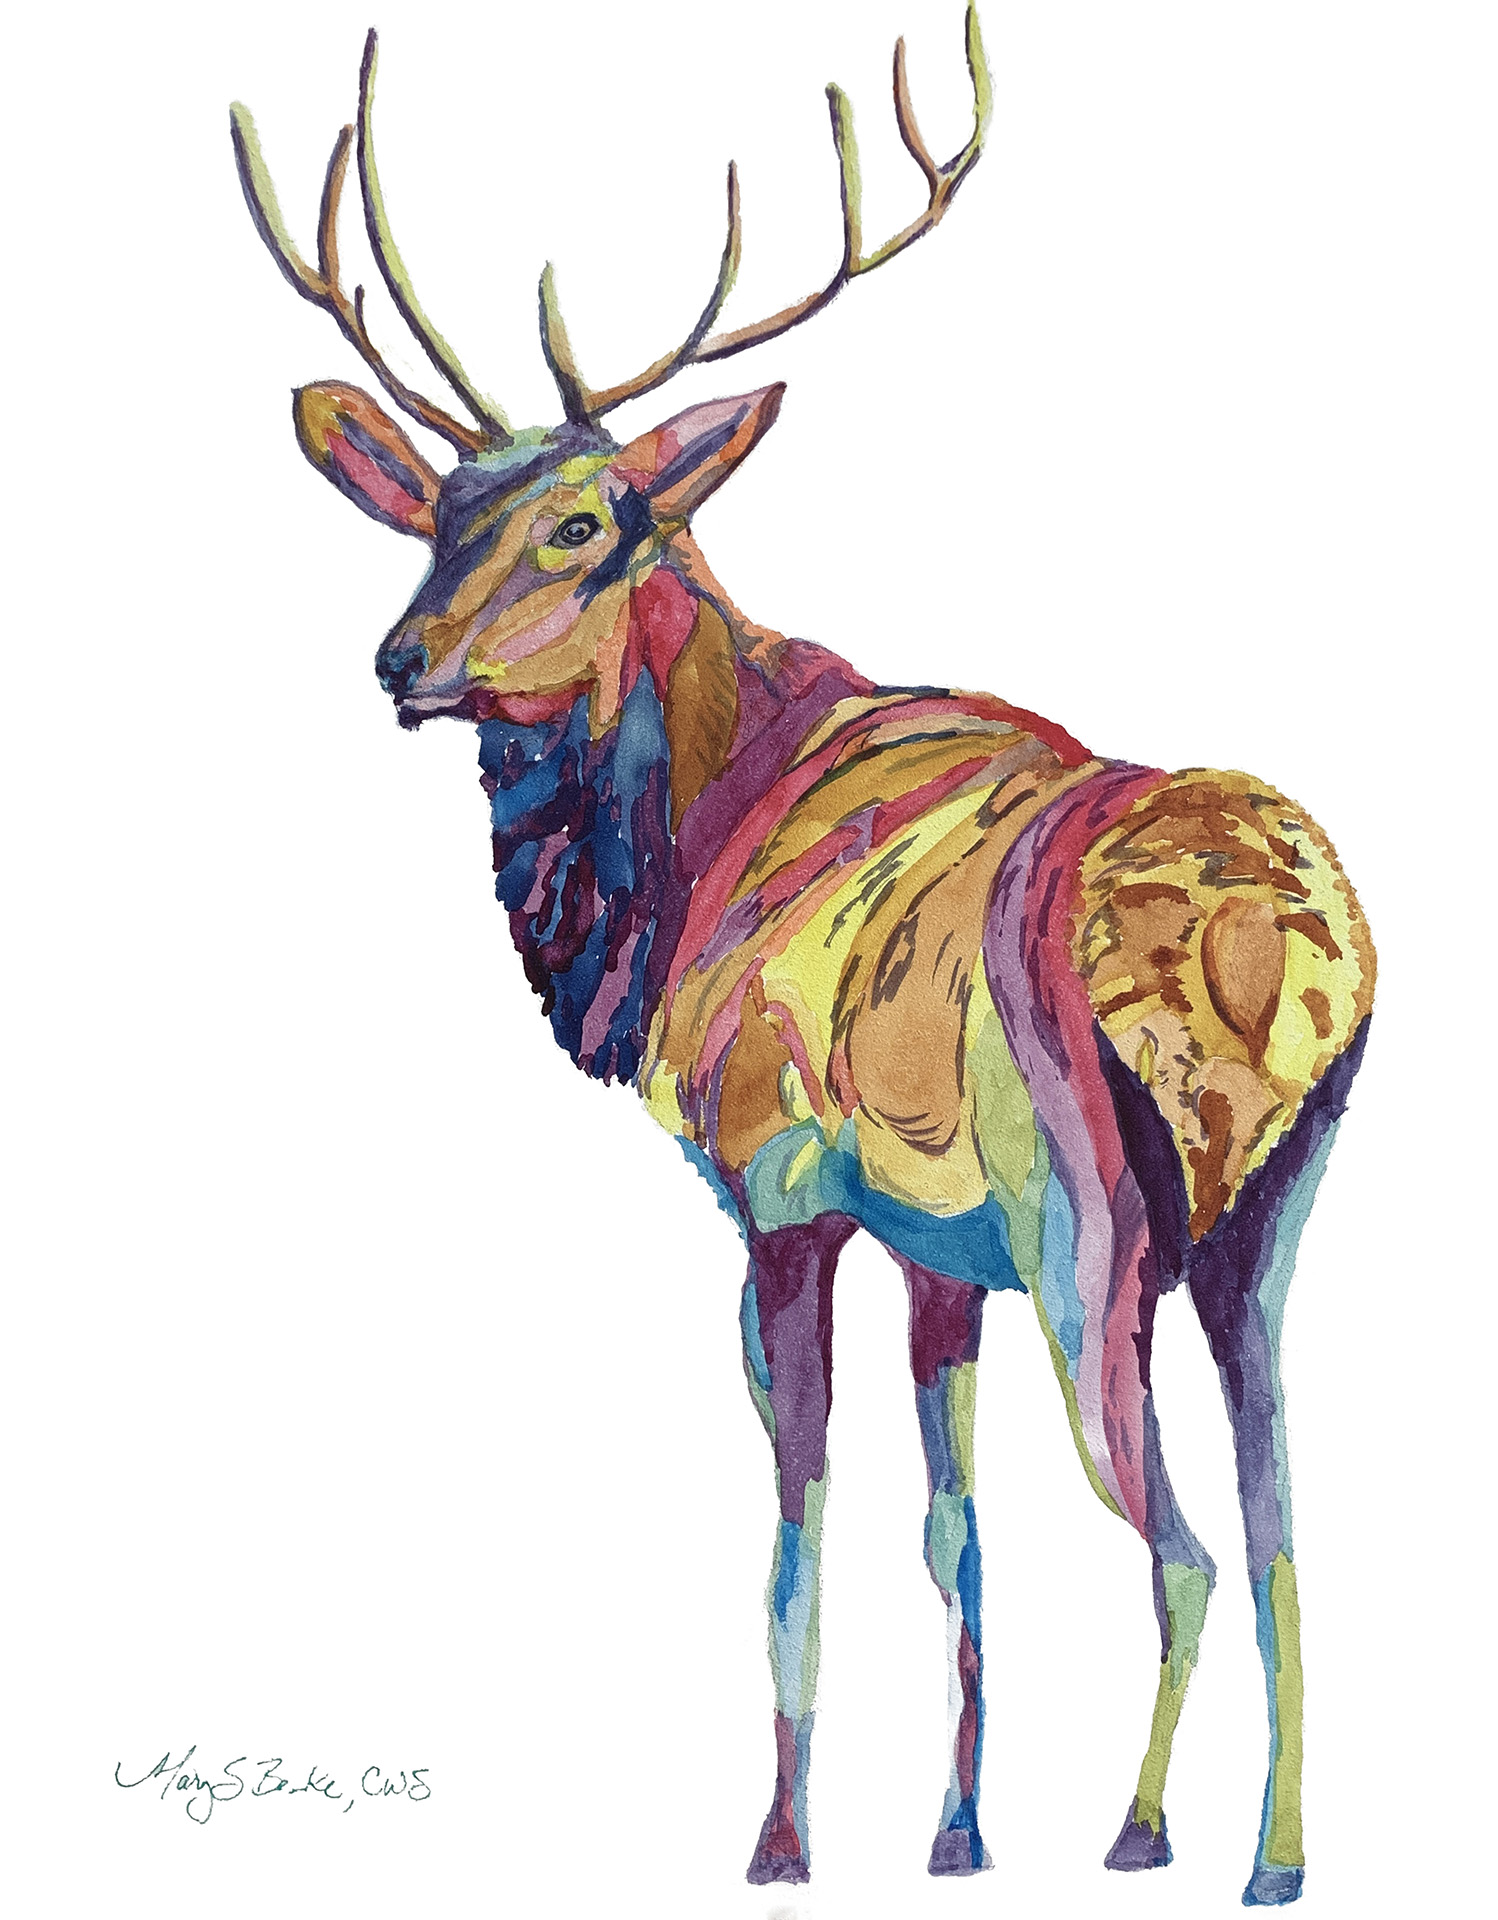 Painted in a fun, colorful style, this watercolor elk's rainbow-colored hide and face stand out against a stark white background by Mary Benke